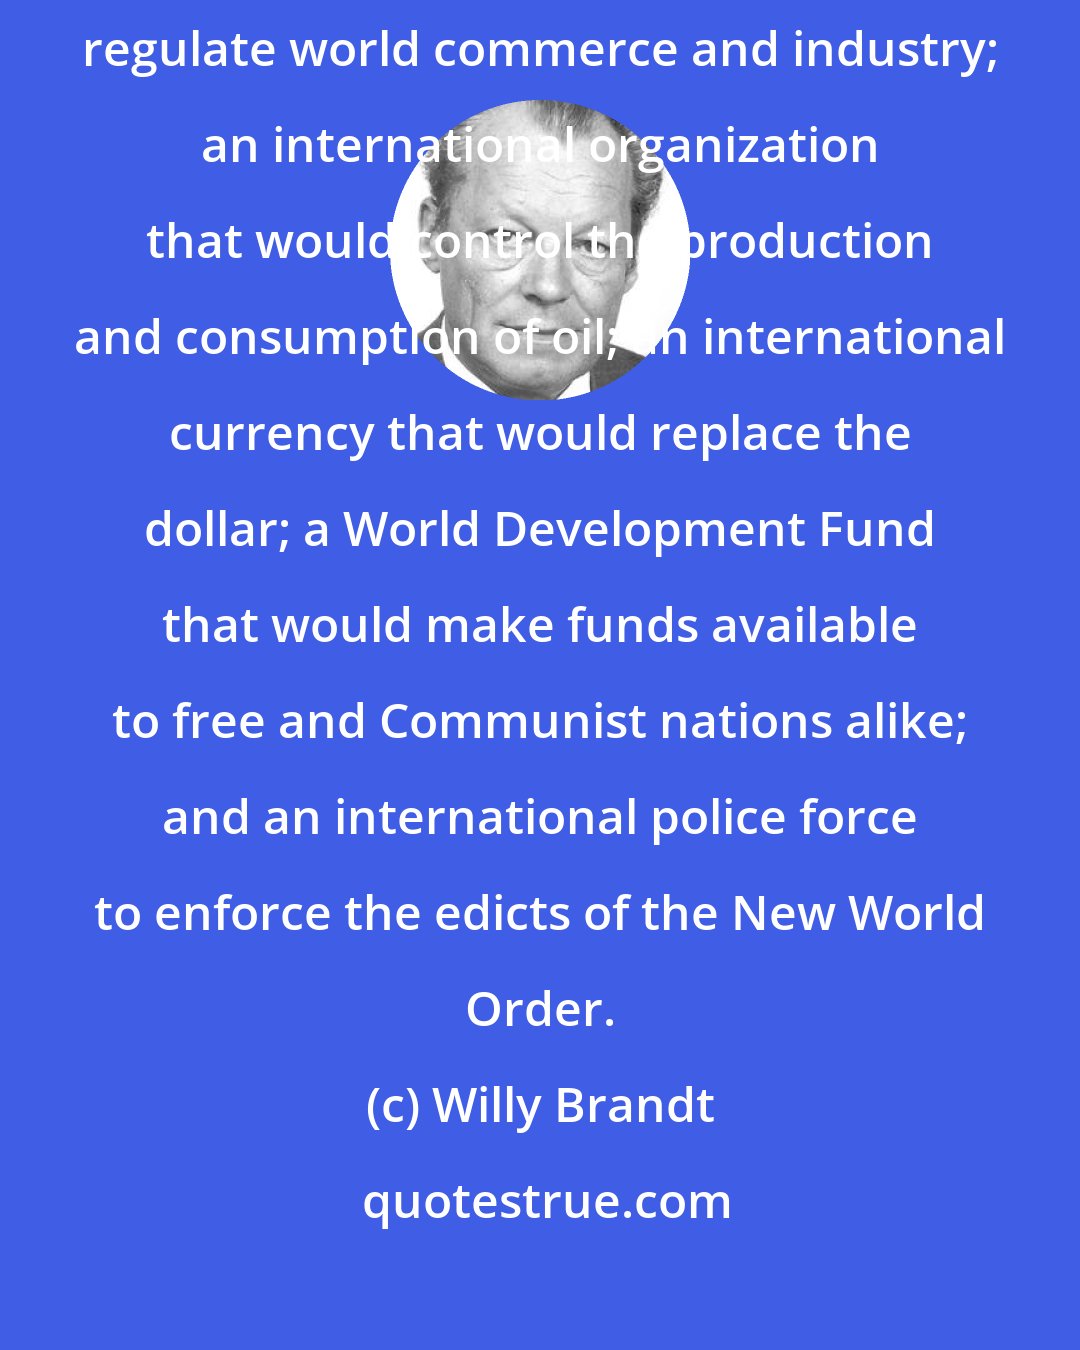 Willy Brandt: The New World Order is a world that has a supernational authority to regulate world commerce and industry; an international organization that would control the production and consumption of oil; an international currency that would replace the dollar; a World Development Fund that would make funds available to free and Communist nations alike; and an international police force to enforce the edicts of the New World Order.